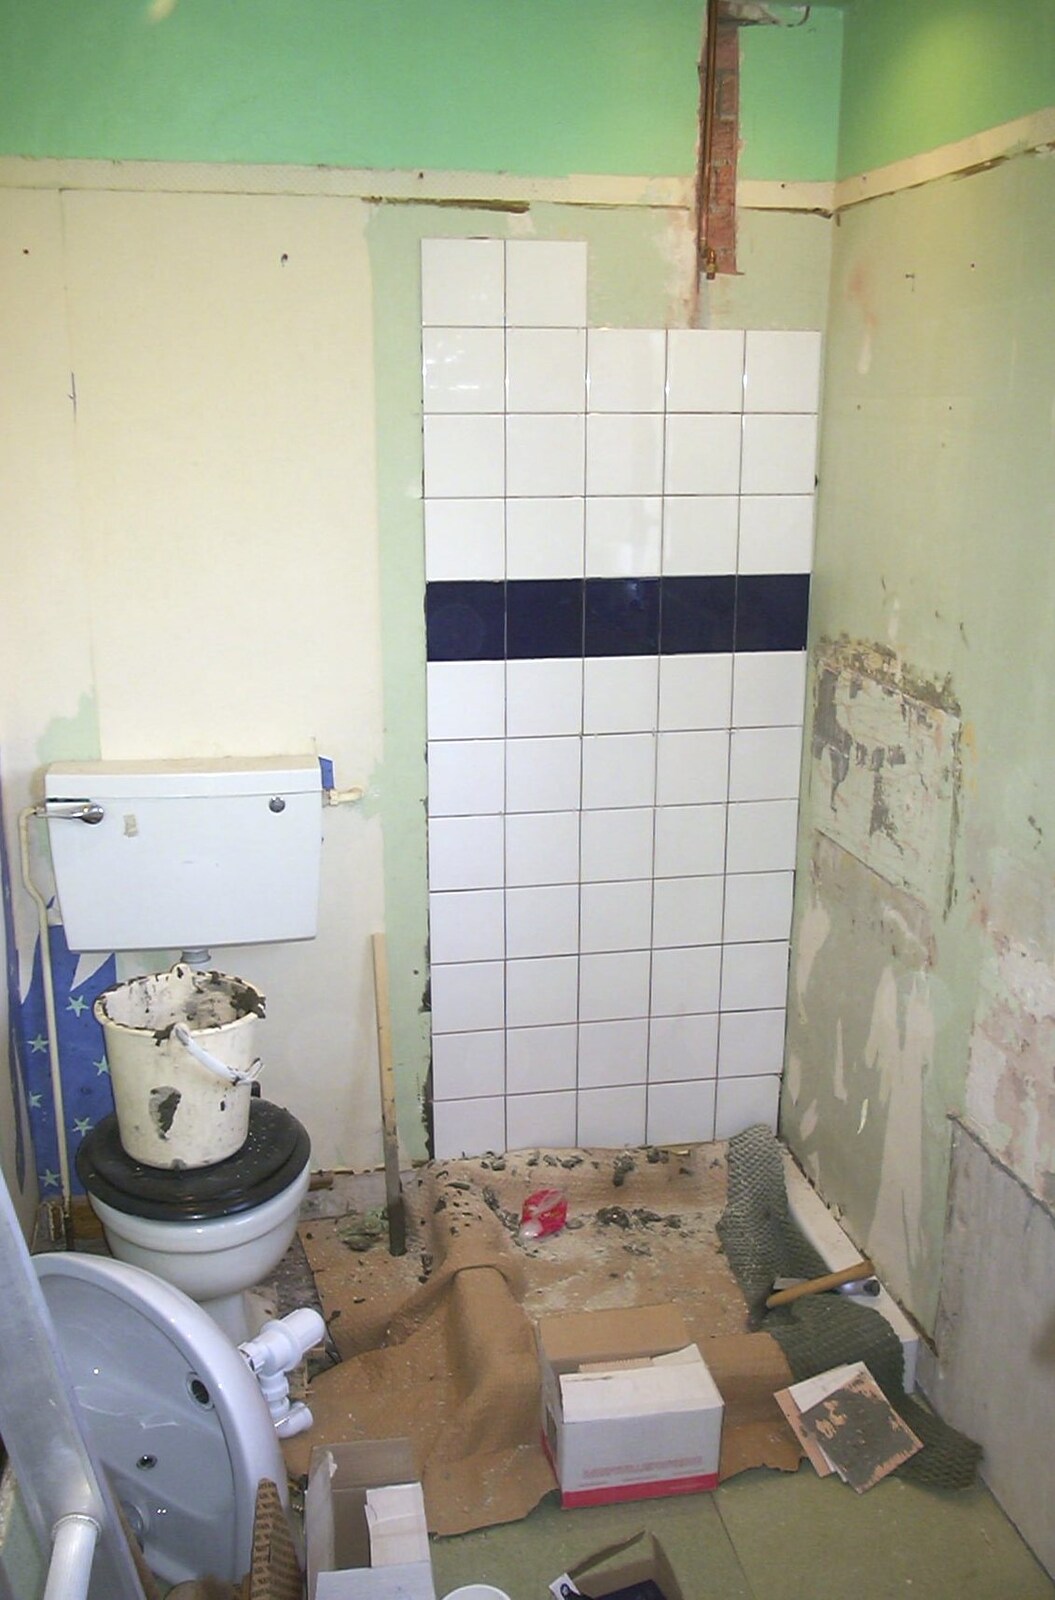 Tiles for a new shower cublicle go on the wall from Bathroom Rebuilding, Brome, Suffolk - 1st February 2002